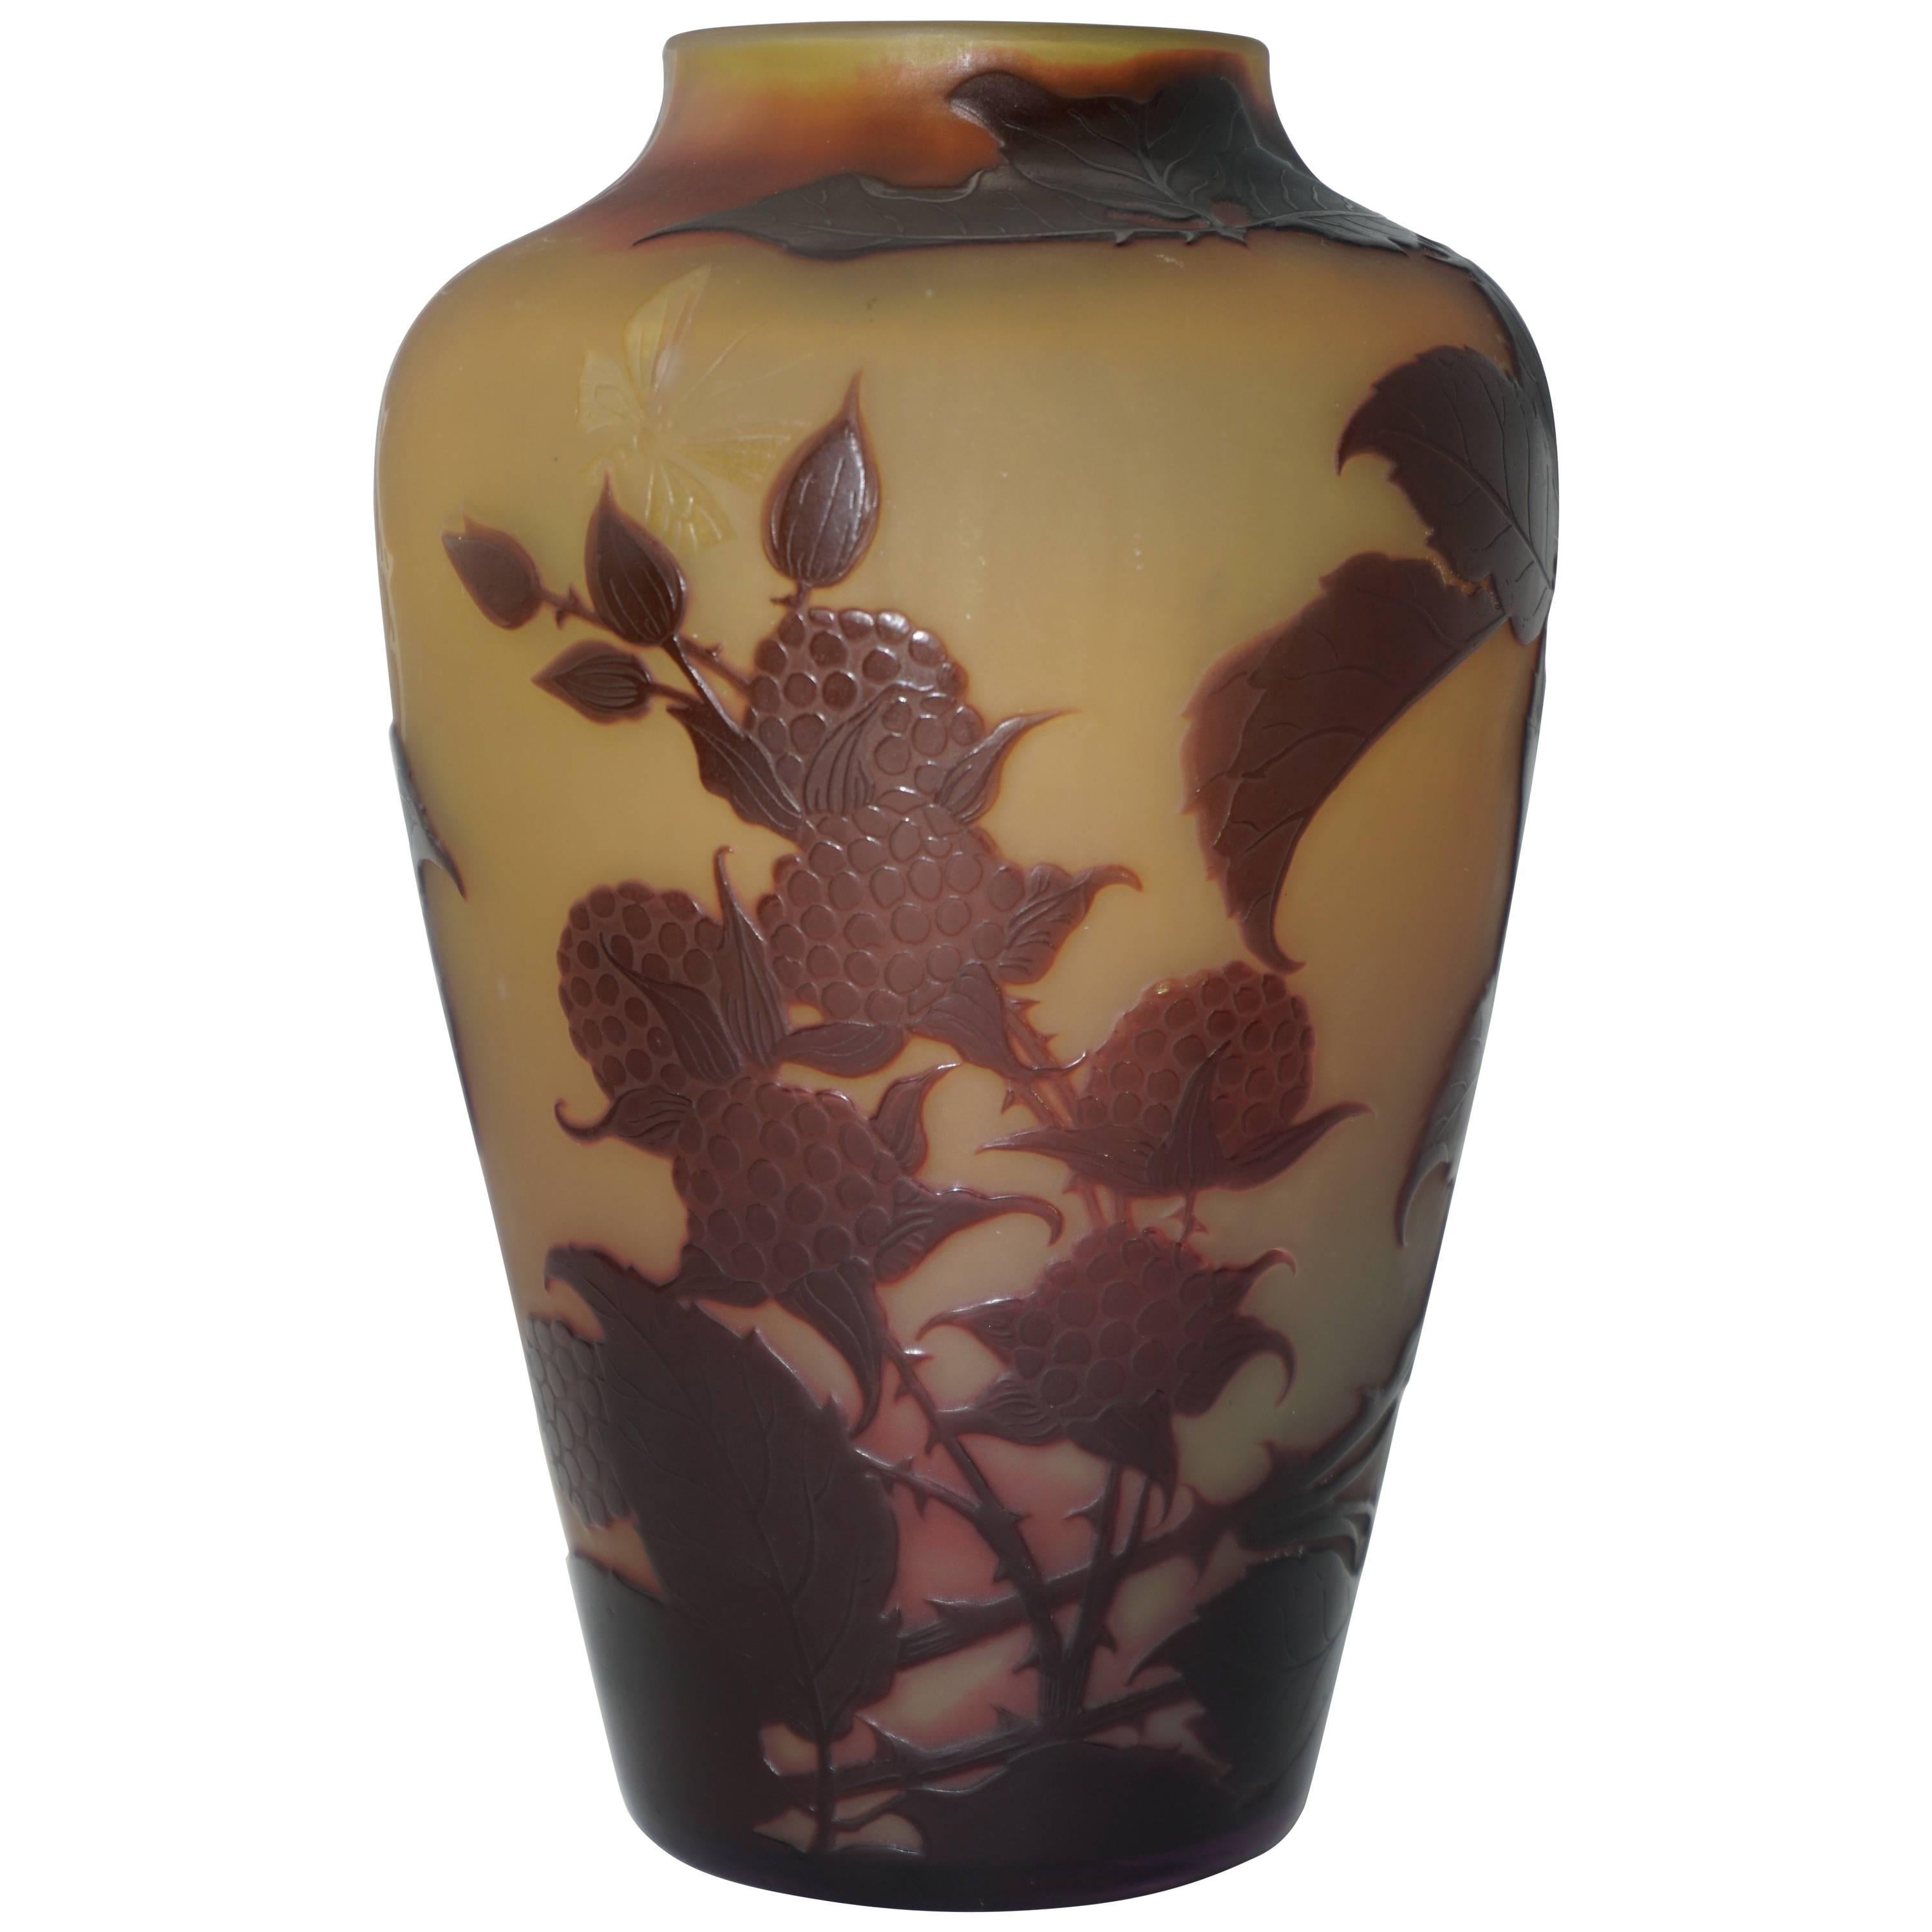 D'Argental Cameo Paul Nicolas Butterfly Carved Vase, circa 1910